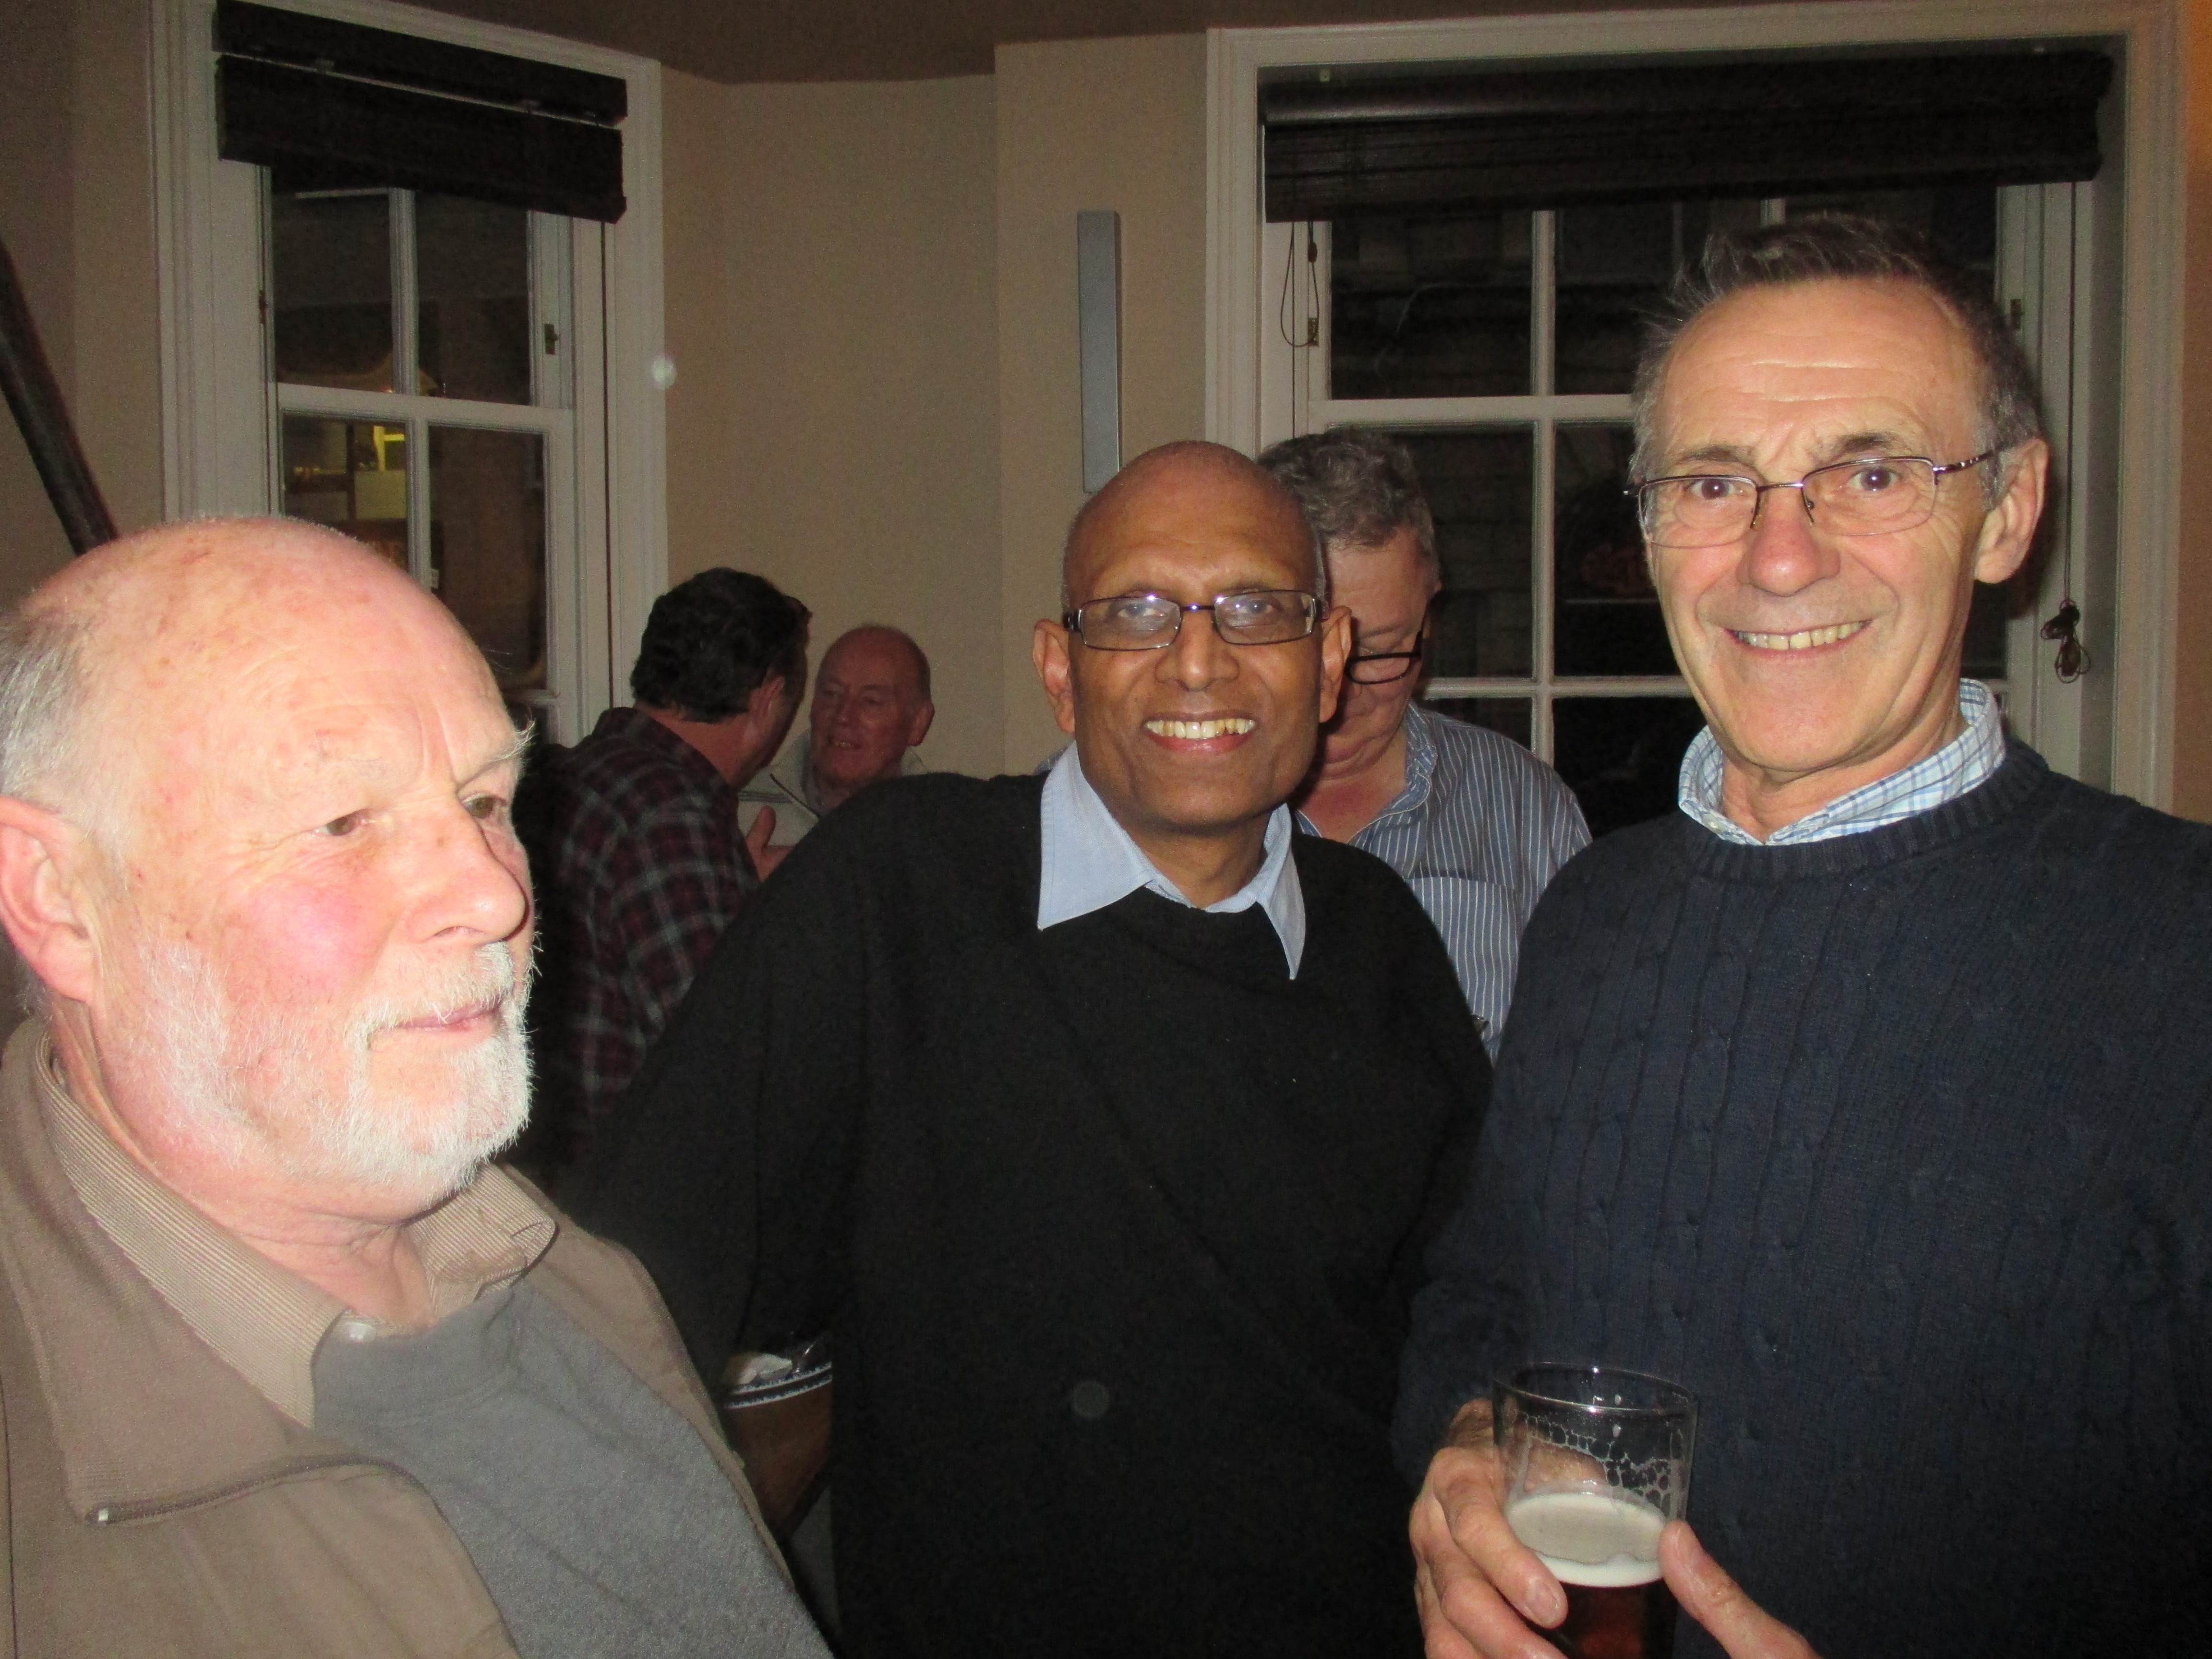 Mike Gregory, Jag Patel and Ken Winter